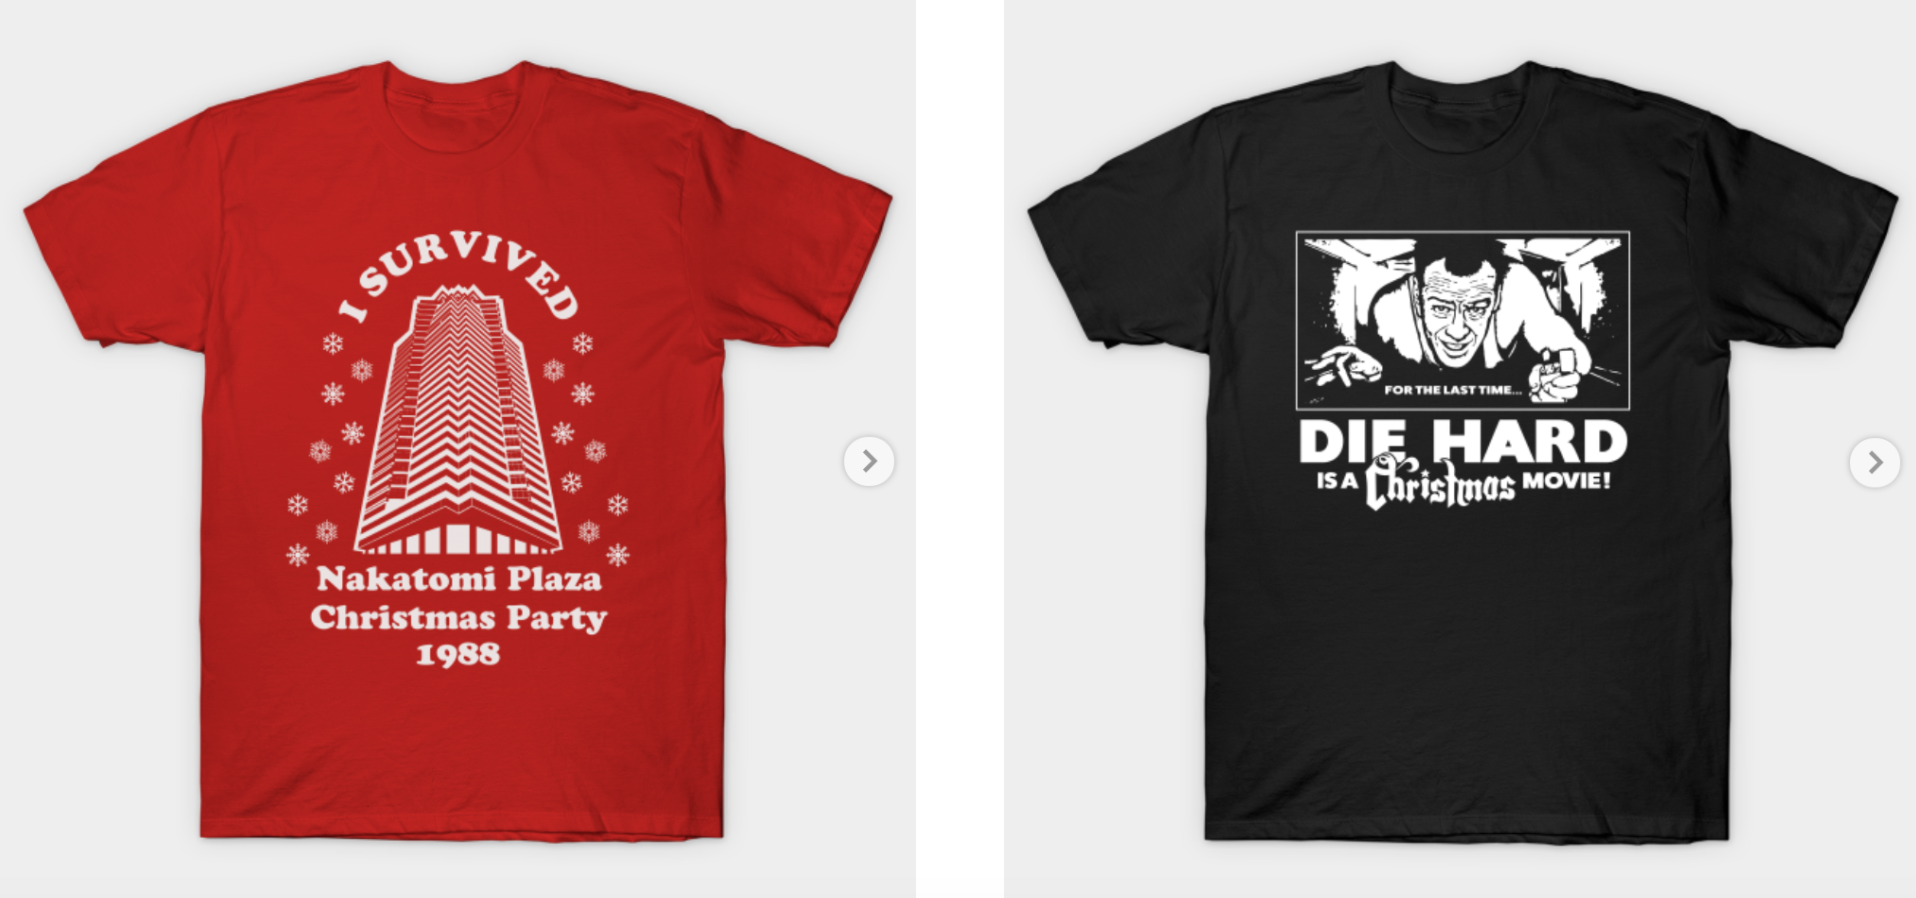 Die Hard Christmas Movie T-Shirts - Ultimate Action Movie Club